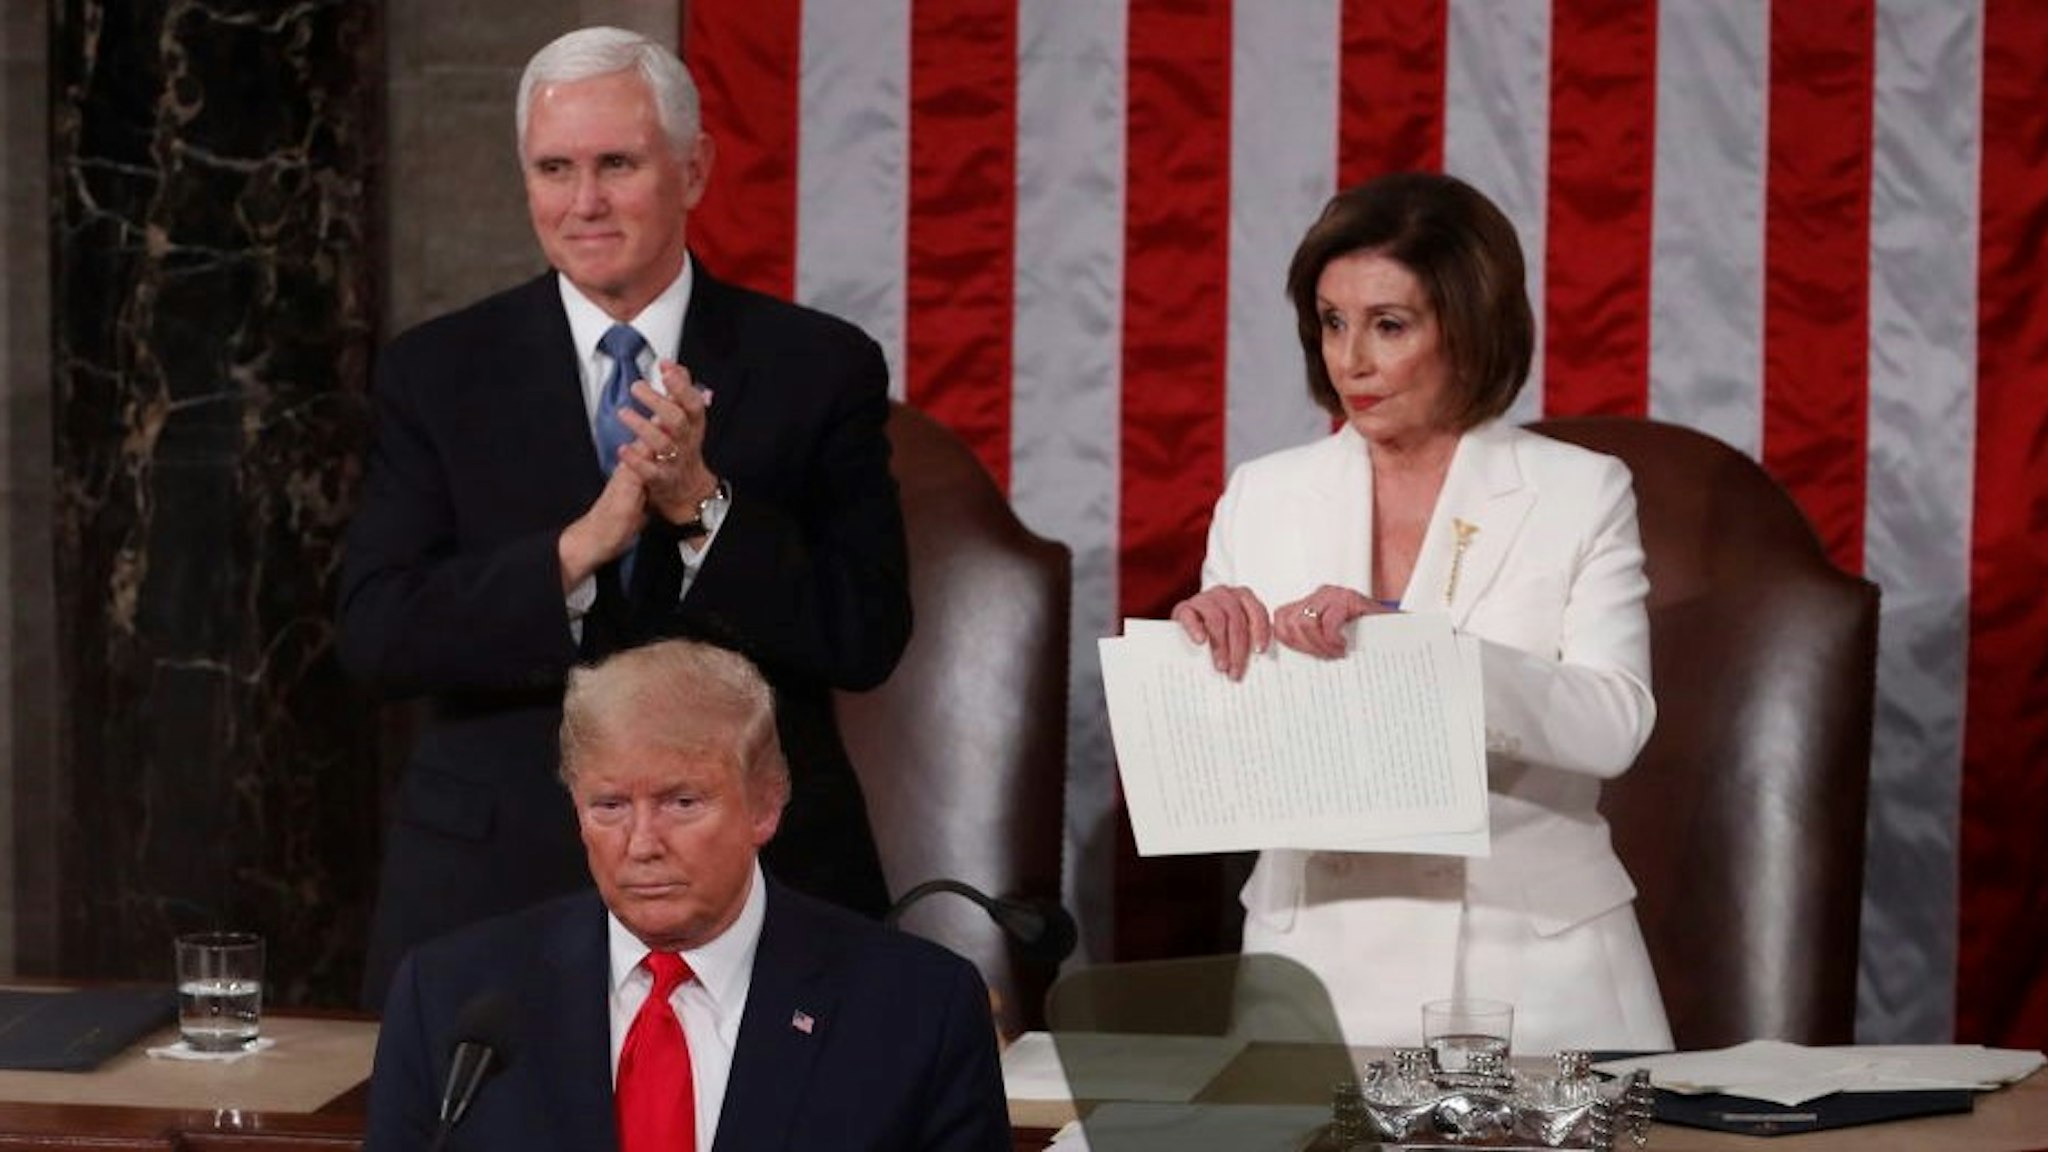 Speaker of the House Nancy Pelosi, a Democrat from California, right, prepares to rip up papers after U.S. President Donald Trump, bottom left, delivers a State of the Union address to a joint session of Congress at the U.S. Capitol in Washington, D.C., U.S., on Tuesday, Feb. 4, 2020. President Donald Trump will try to move past his impeachment and make a case for his re-election in Tuesday's State of the Union address by taking credit for a strong economy, newly signed trade deals and an immigration crackdown. Photographer: